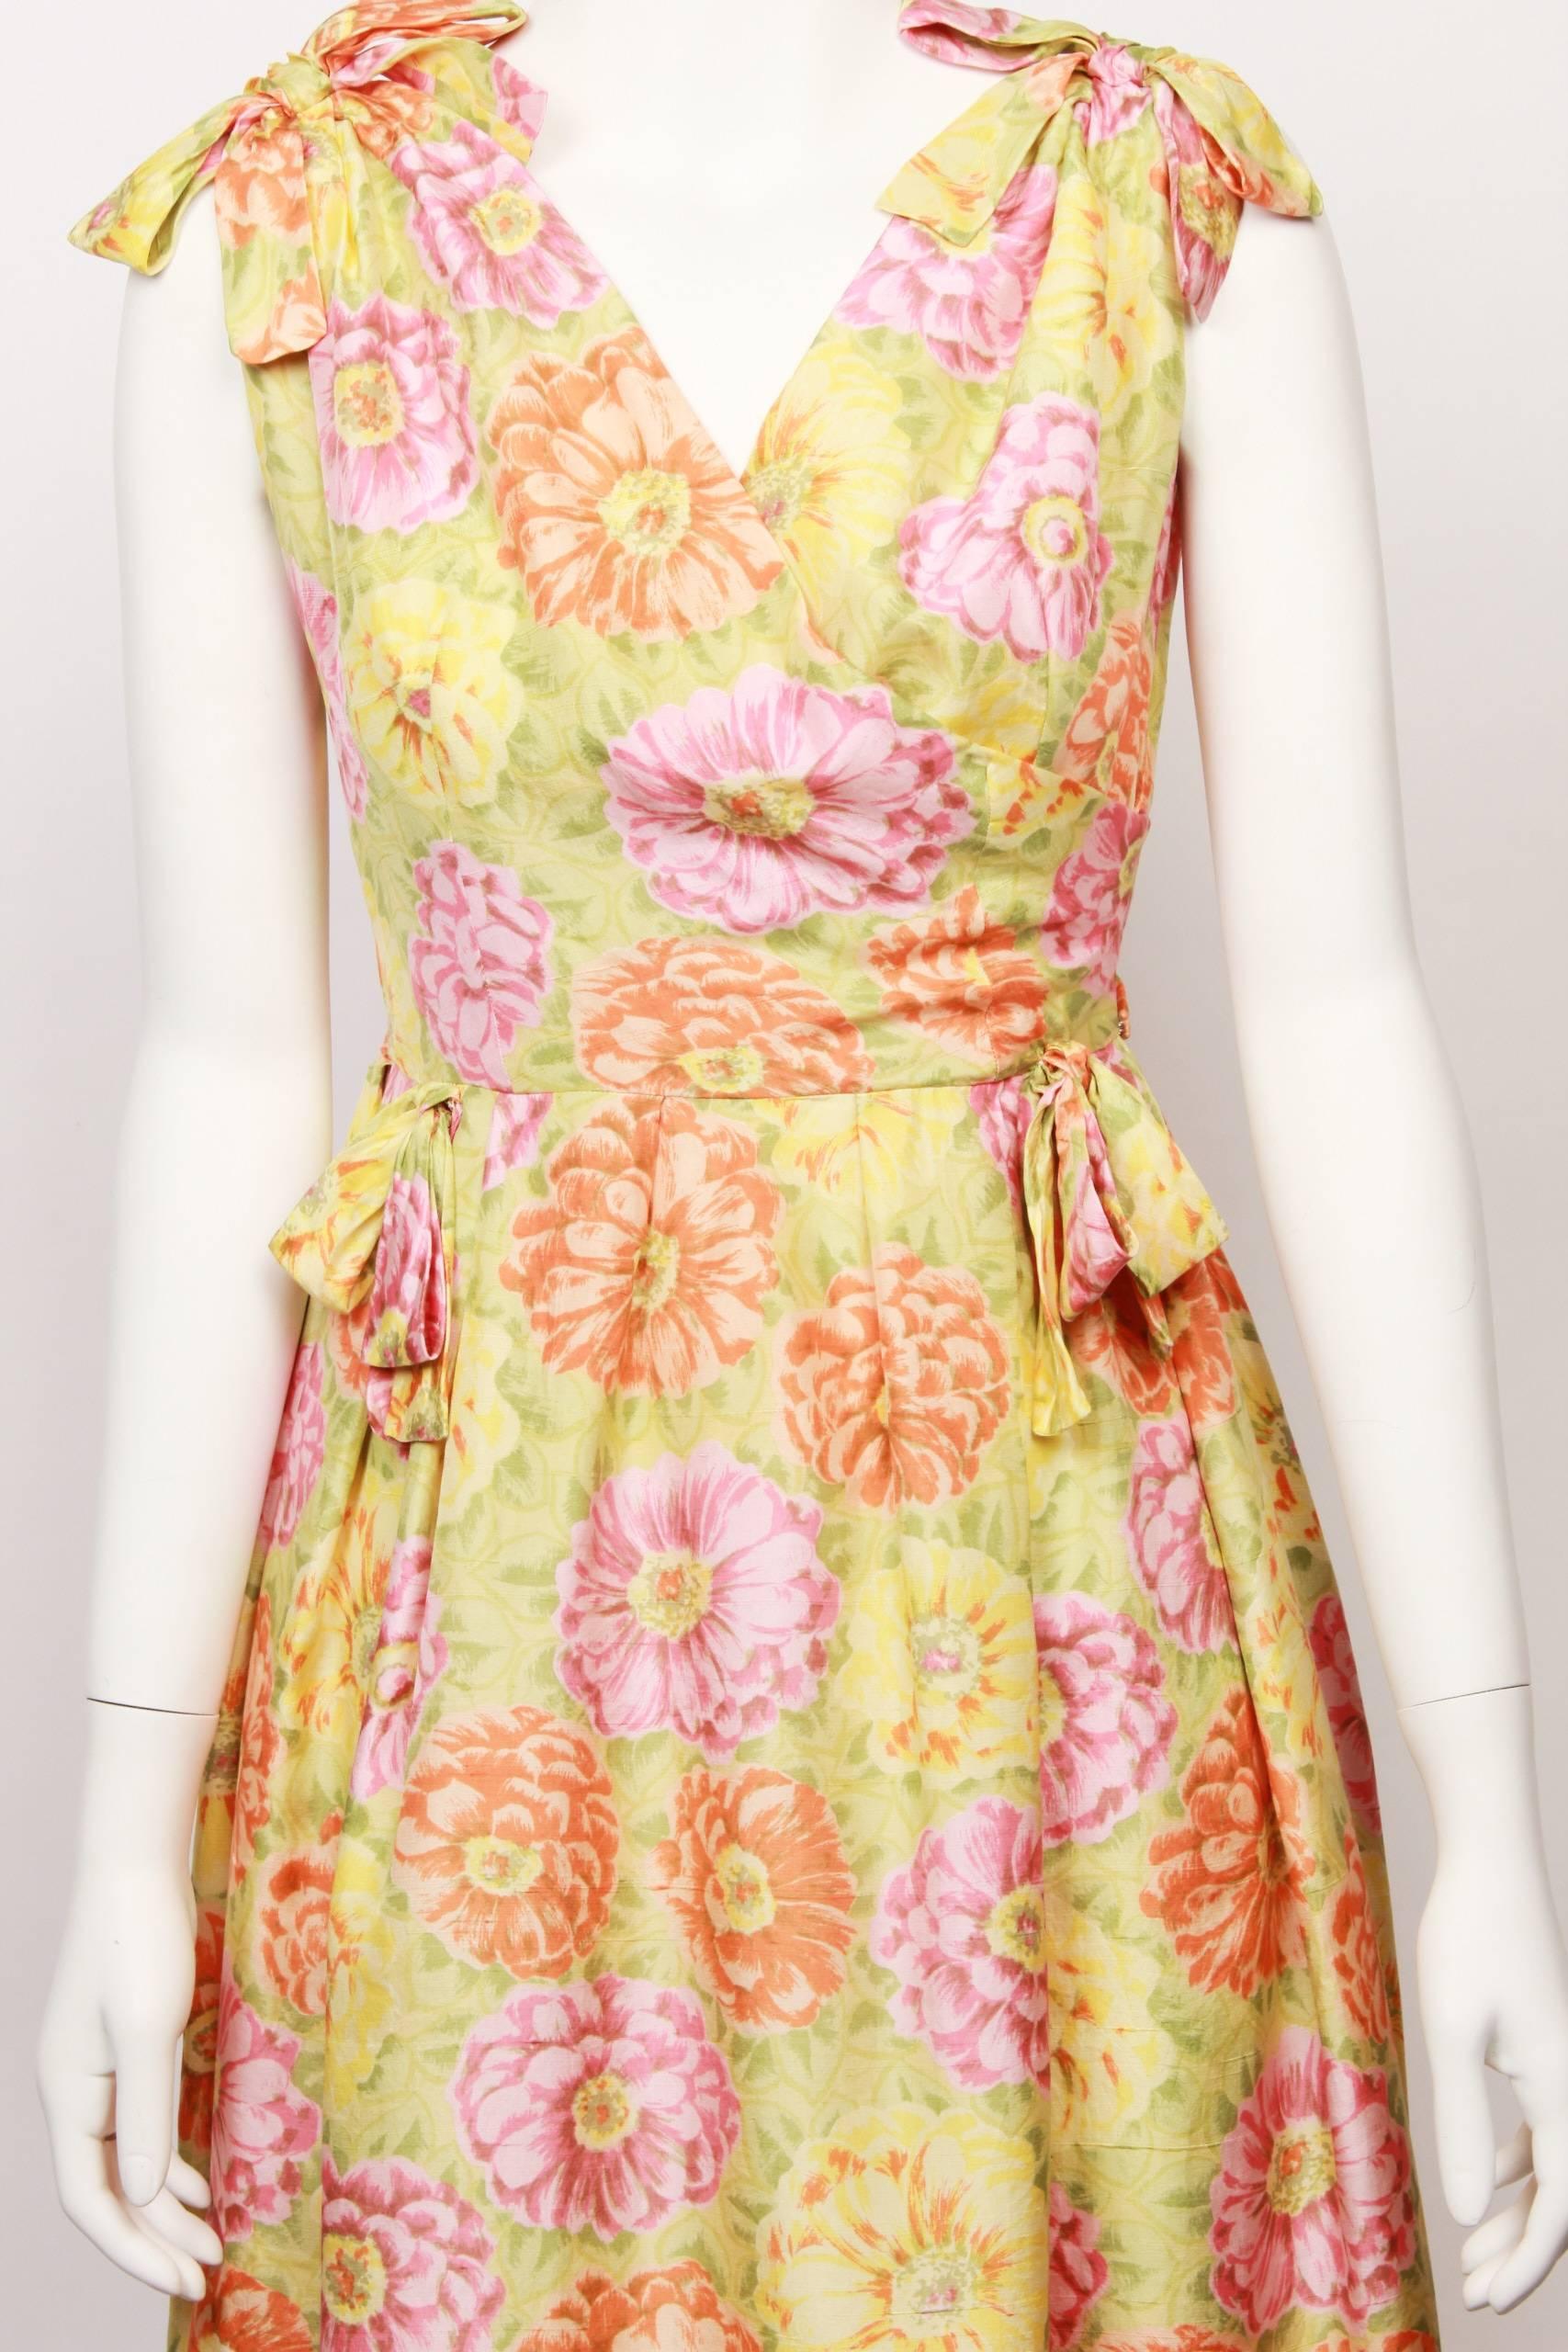 Christian Dior Demi Couture Party Dress, 1960s  In Good Condition For Sale In Melbourne, Victoria